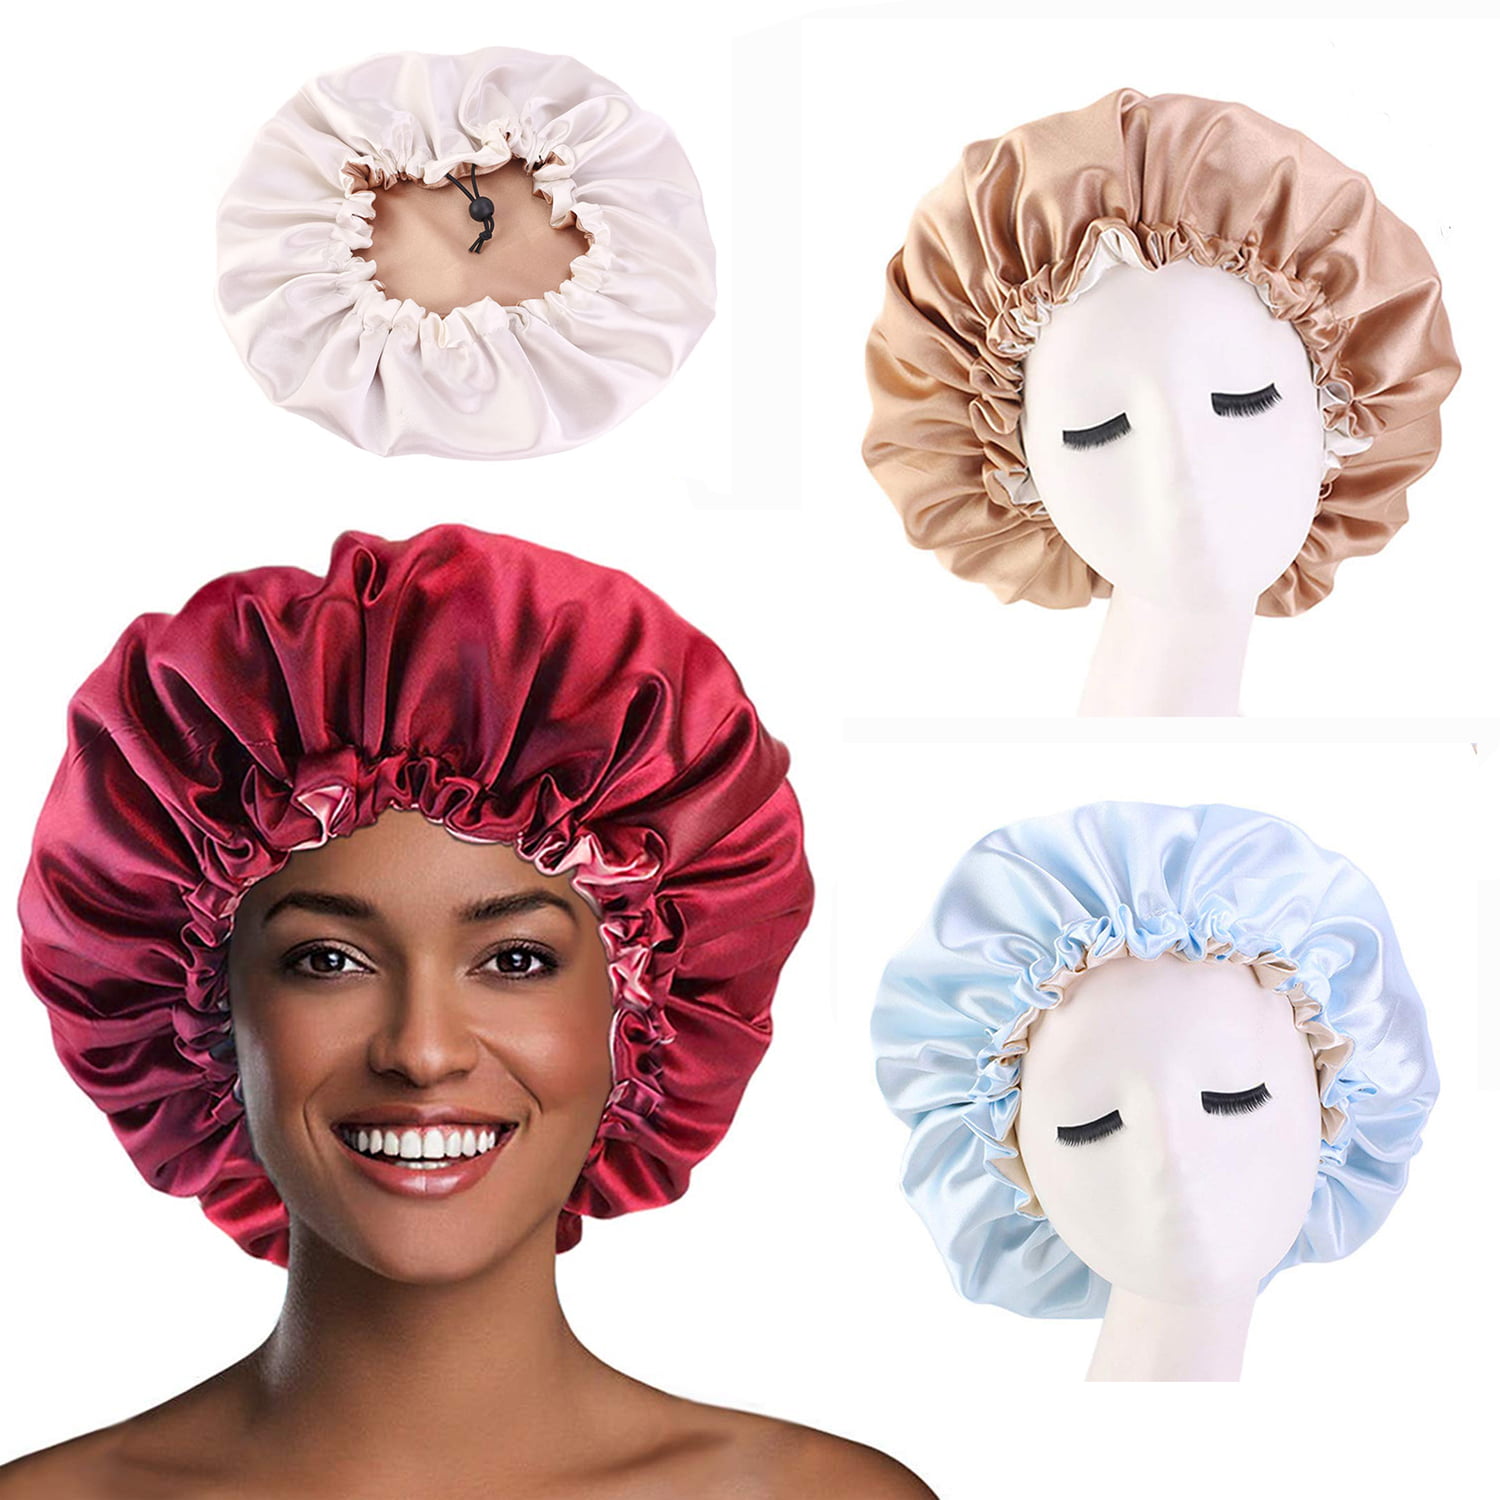 Satin bonnet for Curly Natural Hair, Double Layer Reversible Silk Hair Cap  for Women Sleeping 